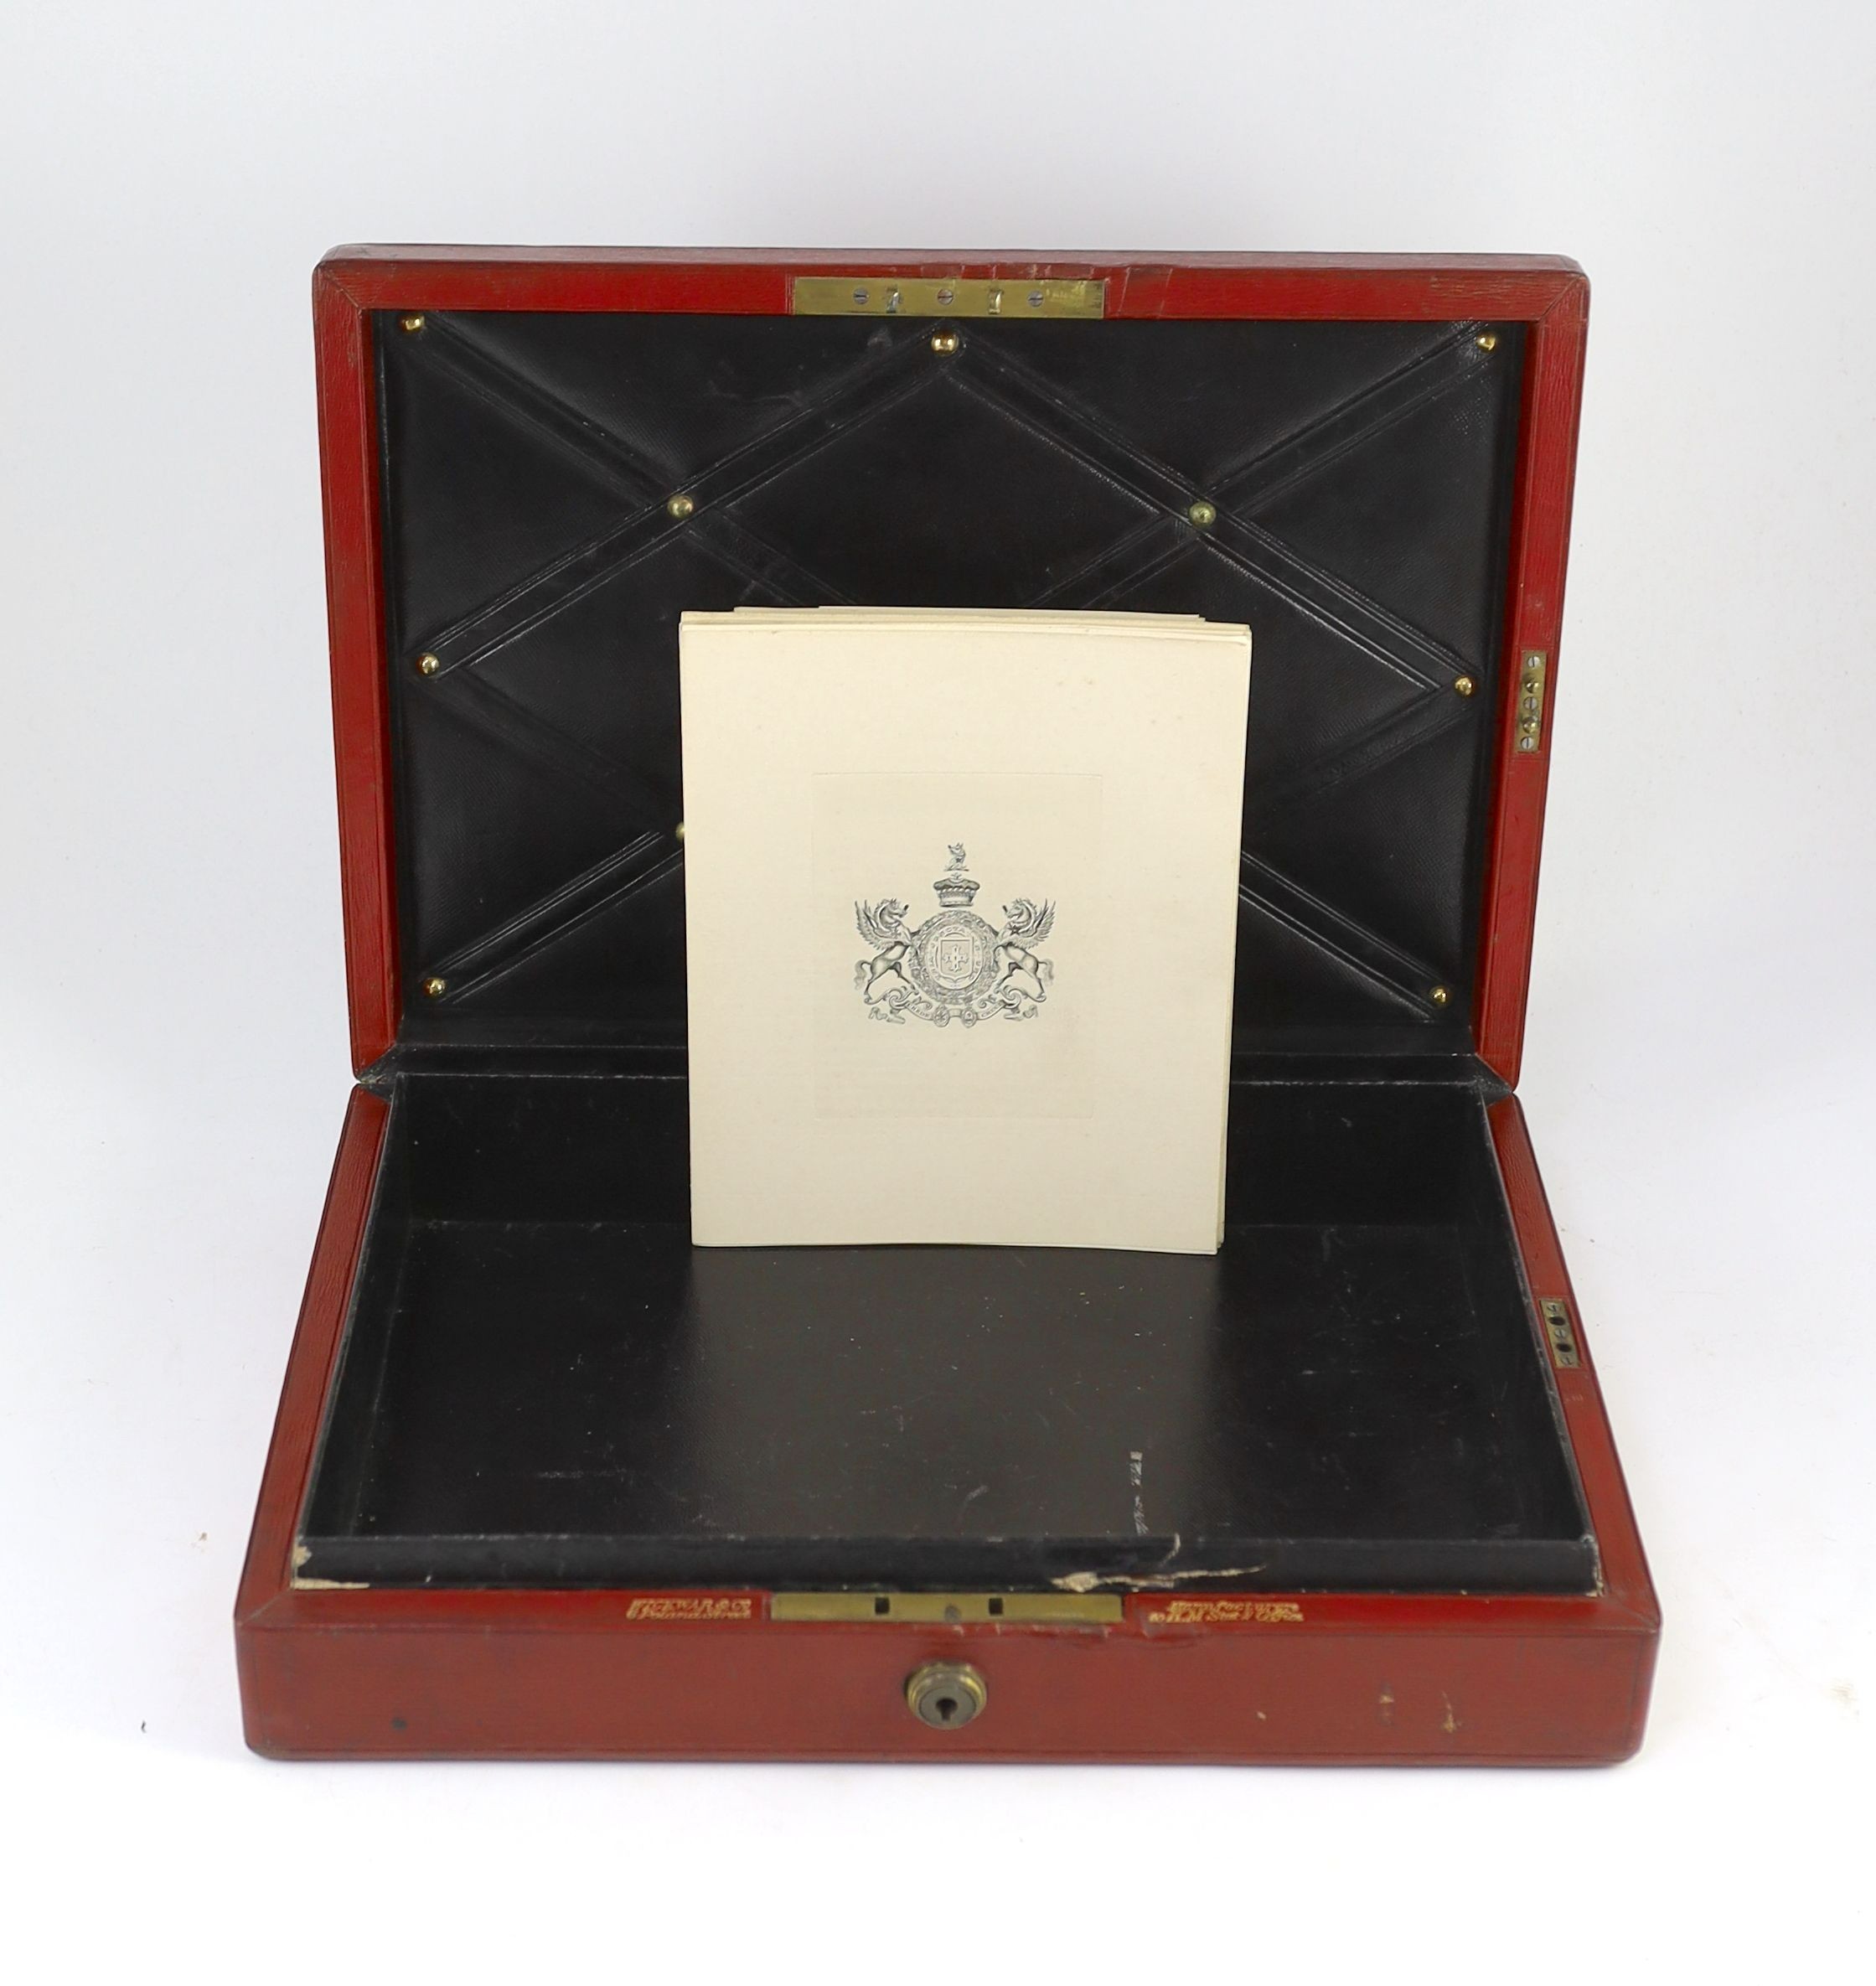 An early 20th century red morocco despatch box, formerly the property of Richard Assheton Cross, b. - Image 4 of 6